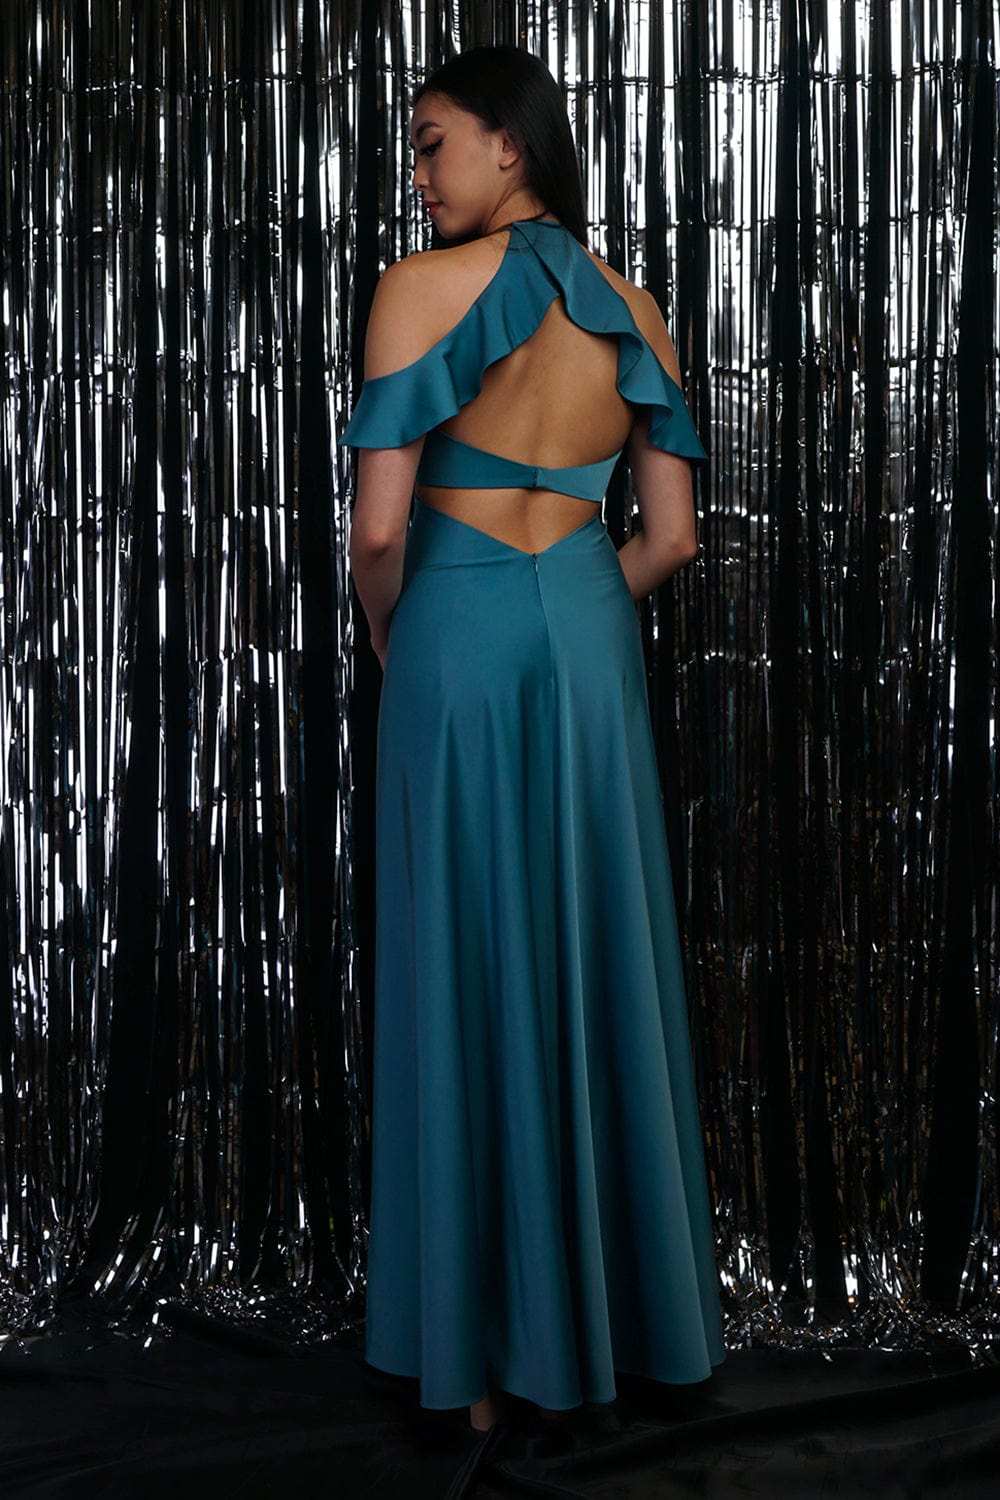 GOWNS Turquoise Off Shoulder Ruffle Kai Gown - Chloe Dao